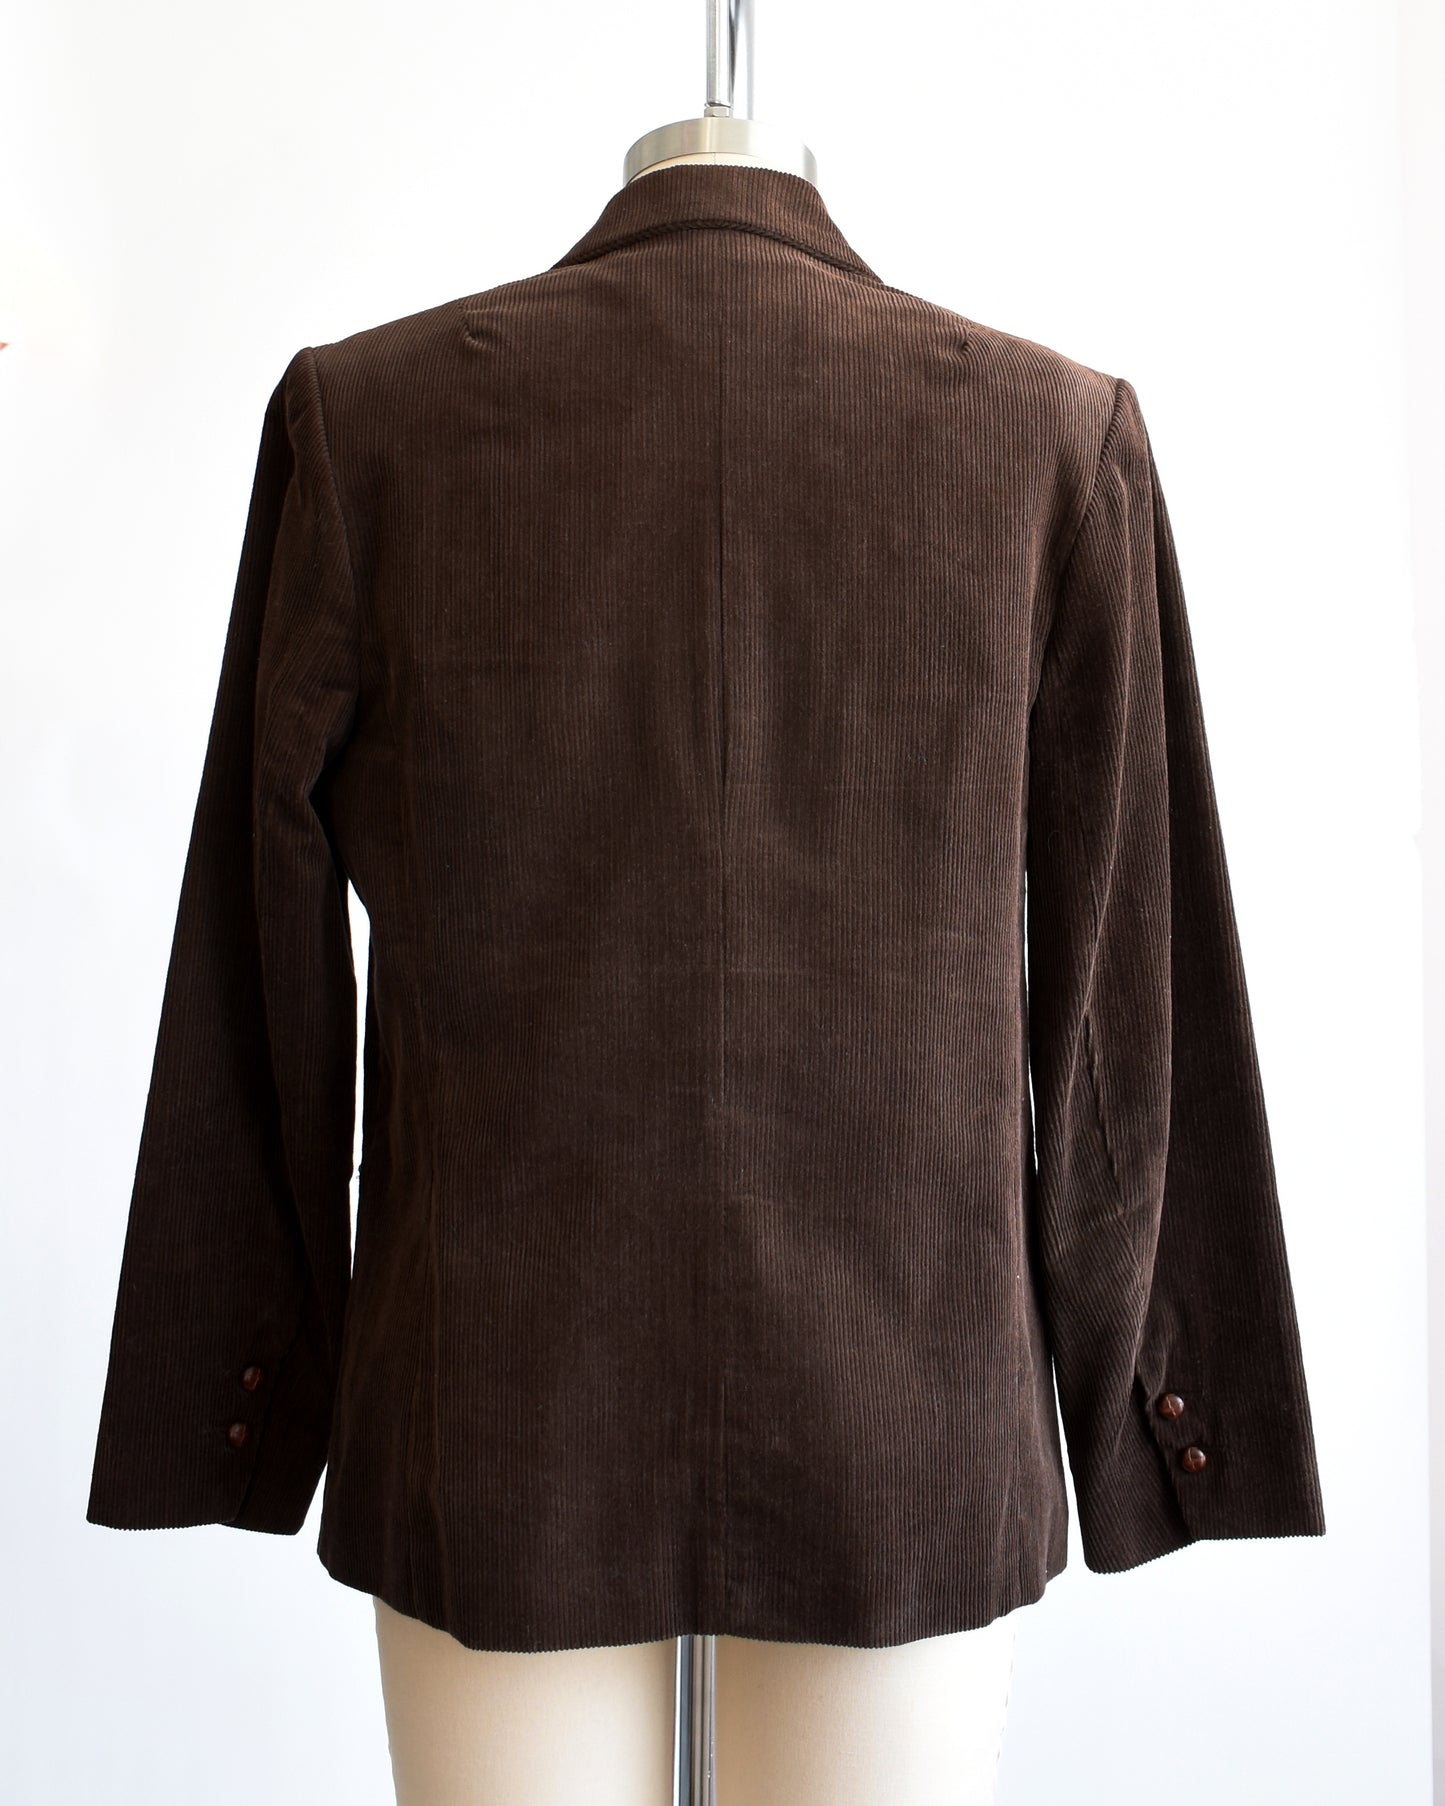 Back view of a vintage 1970s chocolate brown corduroy blazer features two faux wood plastic buttons on the front and two smaller matching buttons on the cuffs.